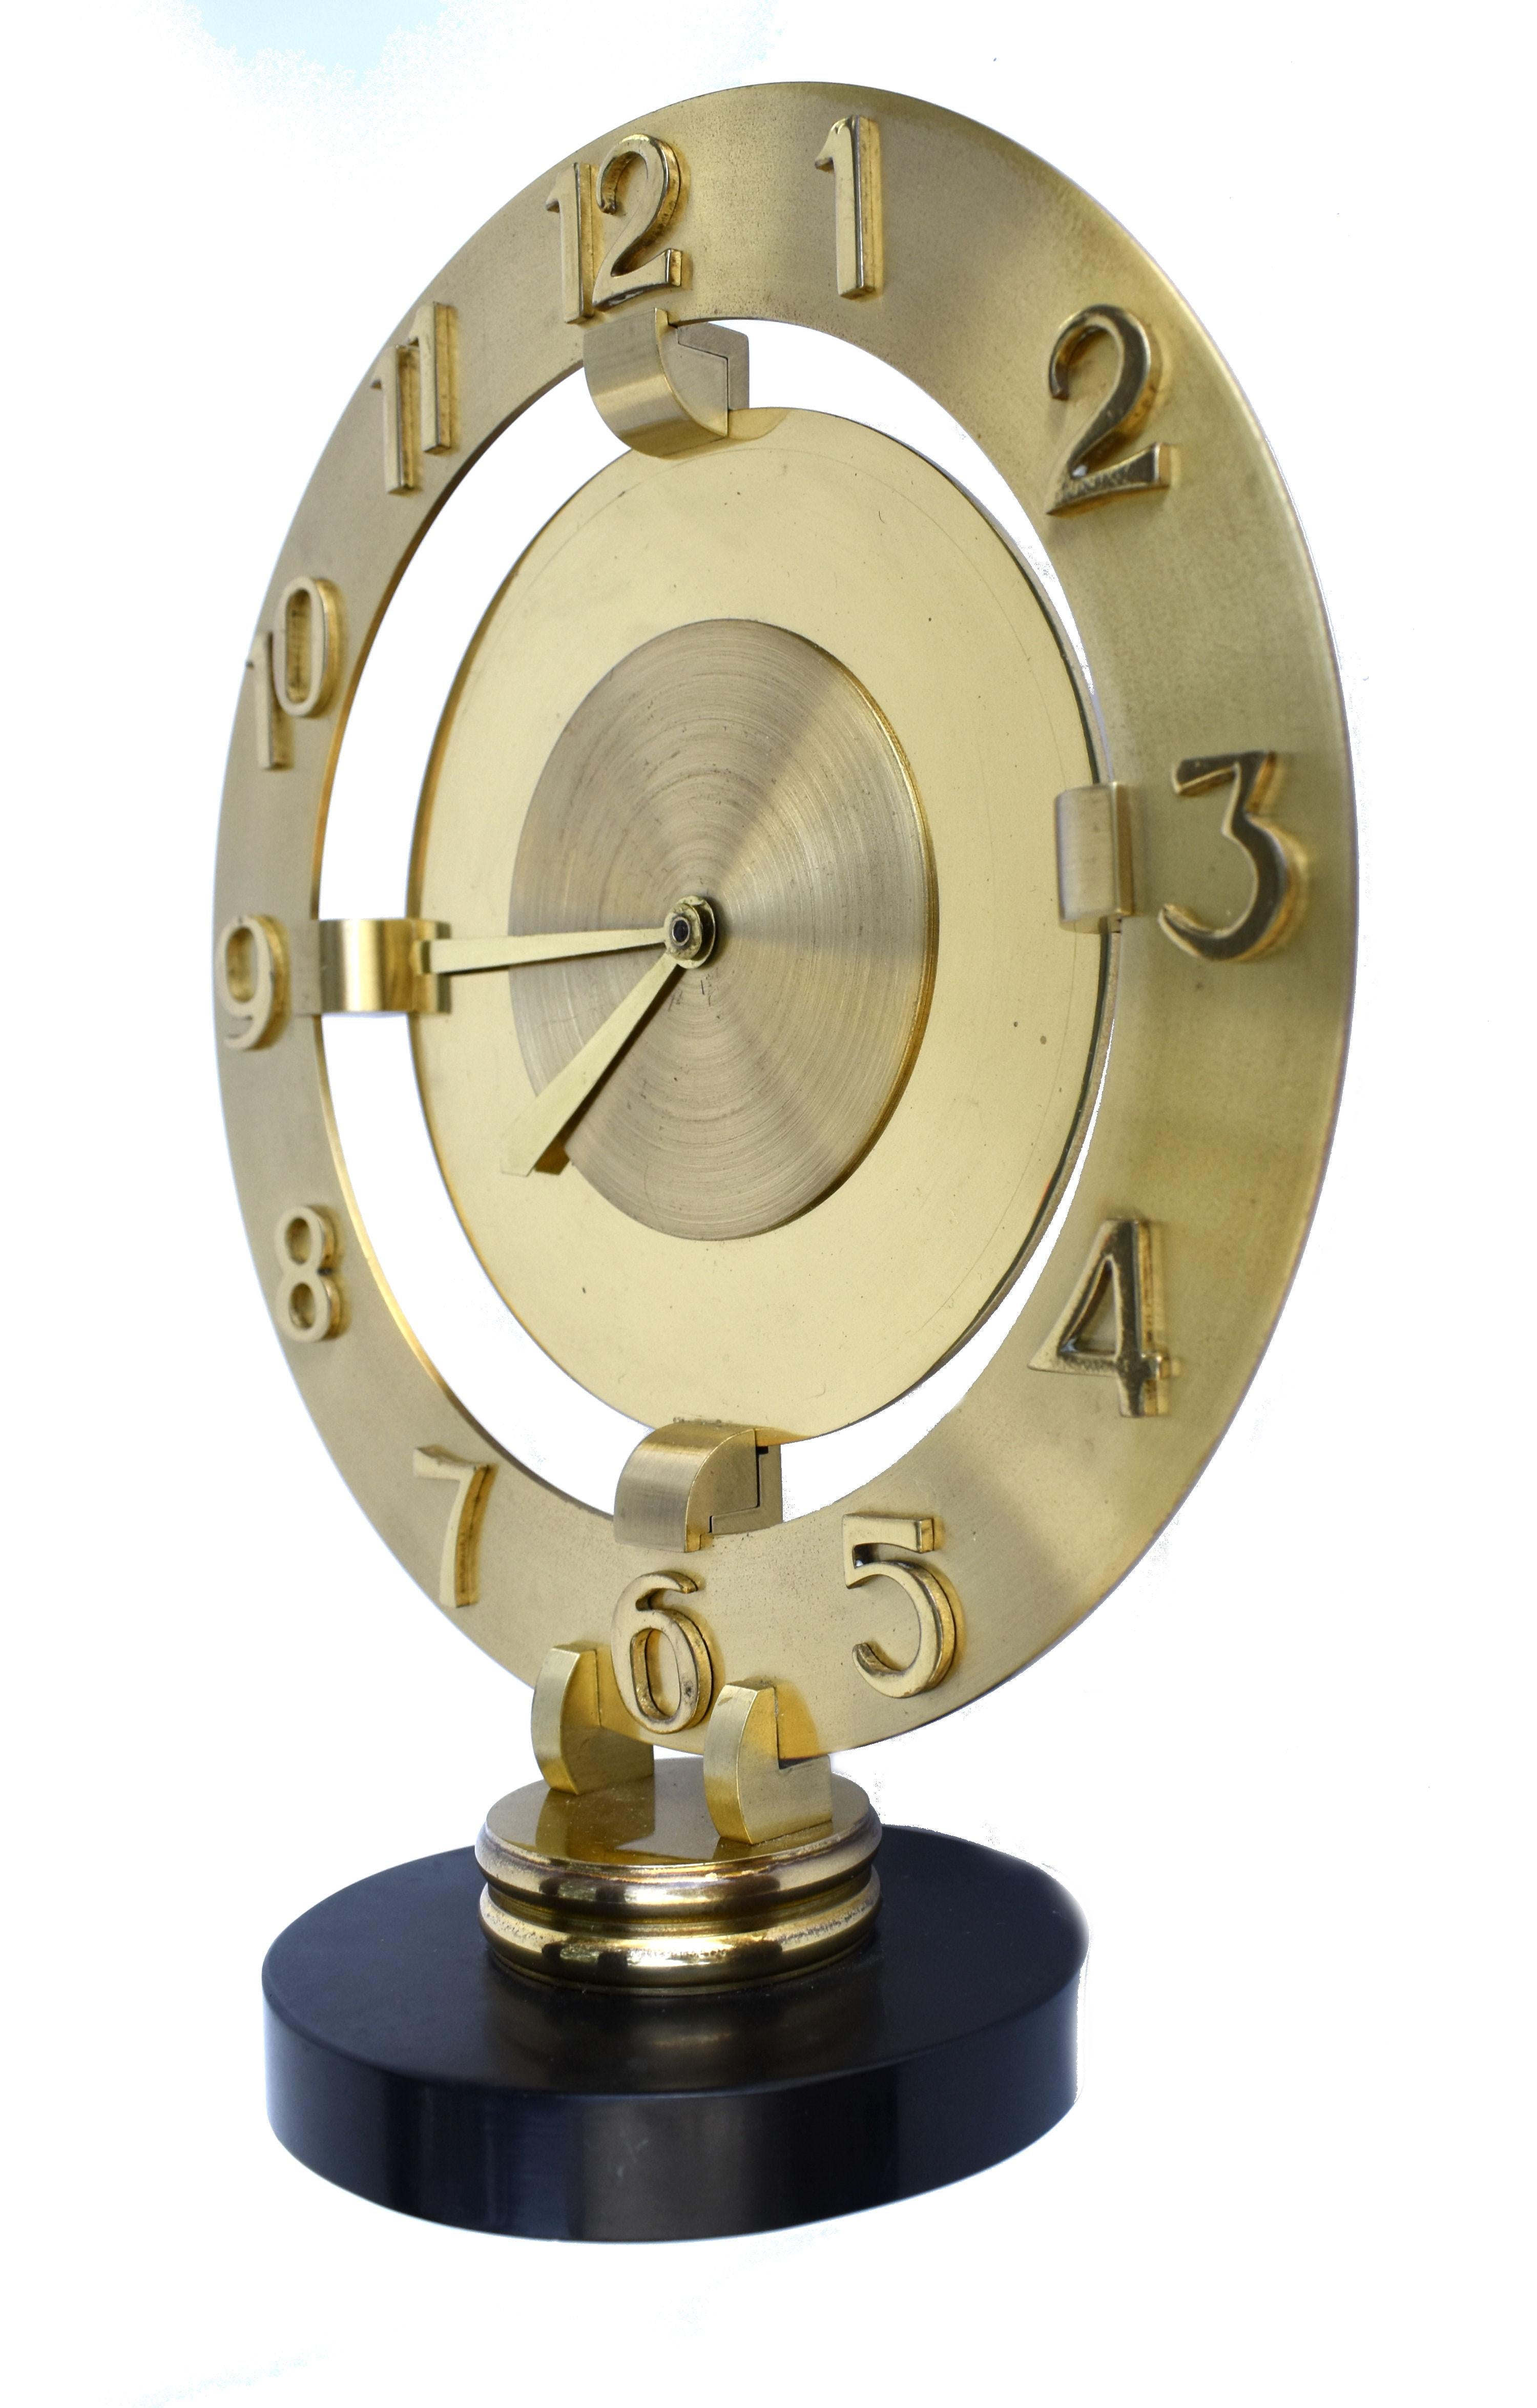 Art Deco Modernist Mantle Clock By Bayard, French , c1940 For Sale 7